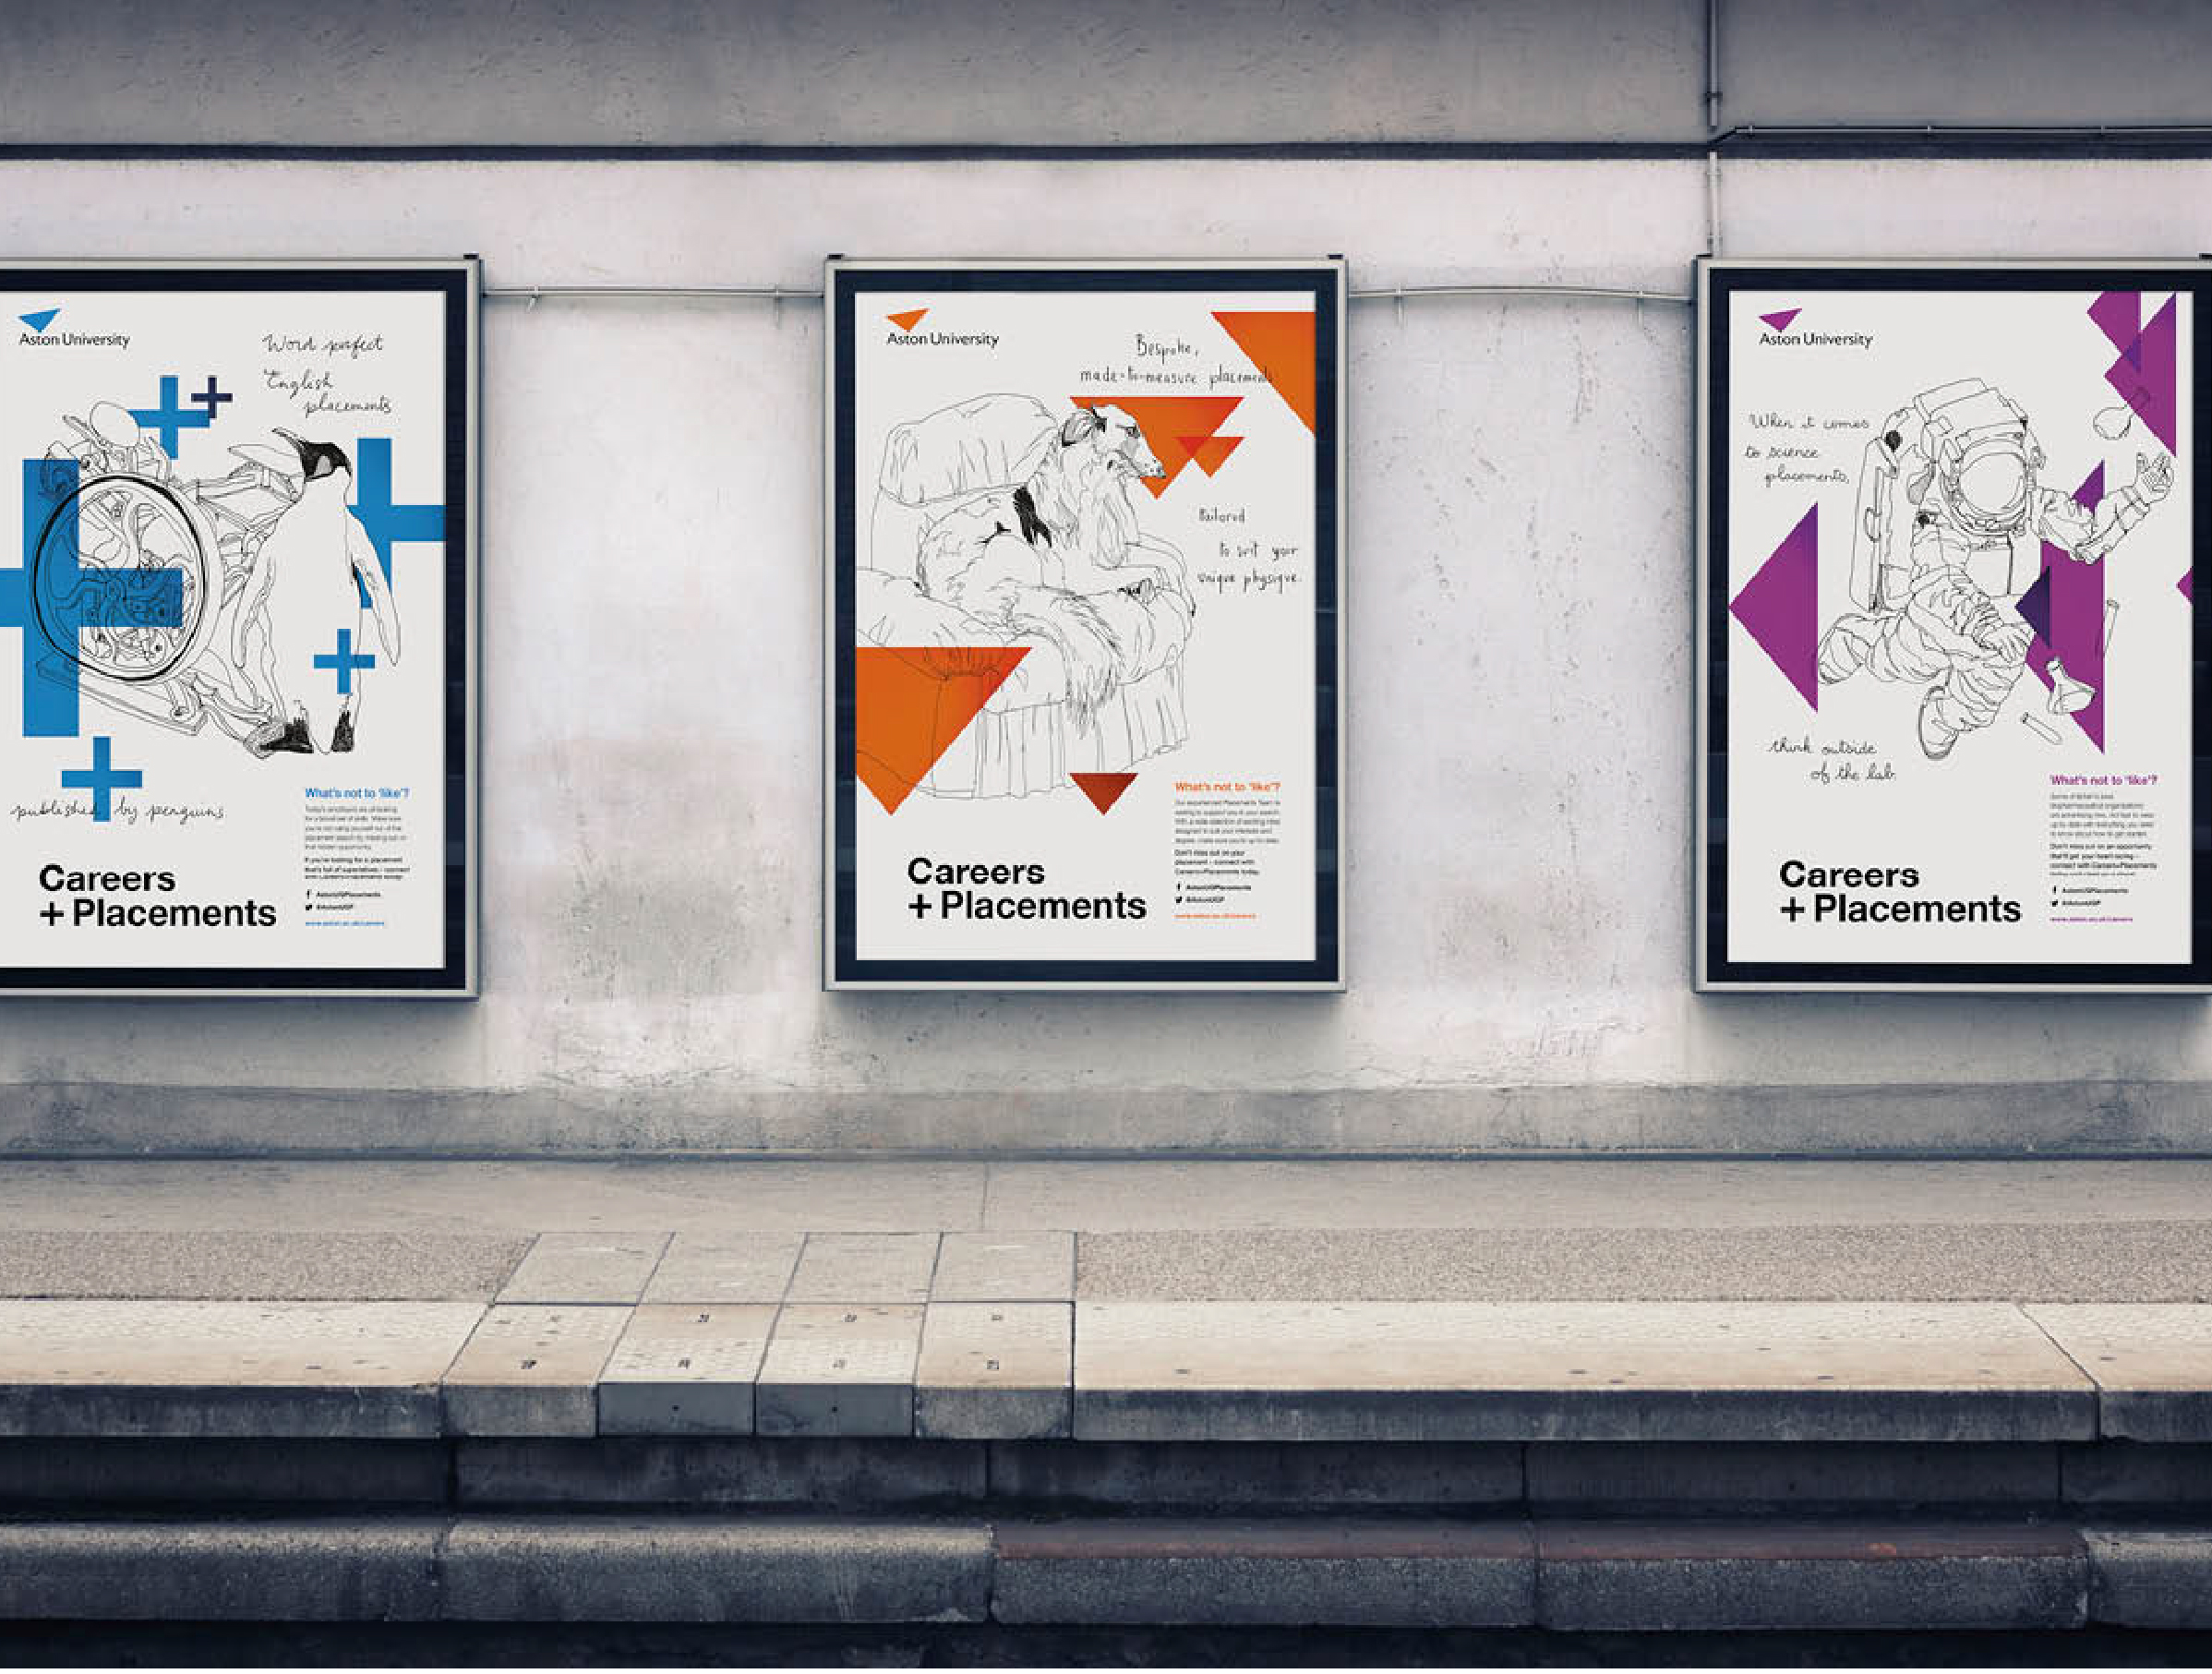 Aston University Careers + Placements brand on outdoor ads